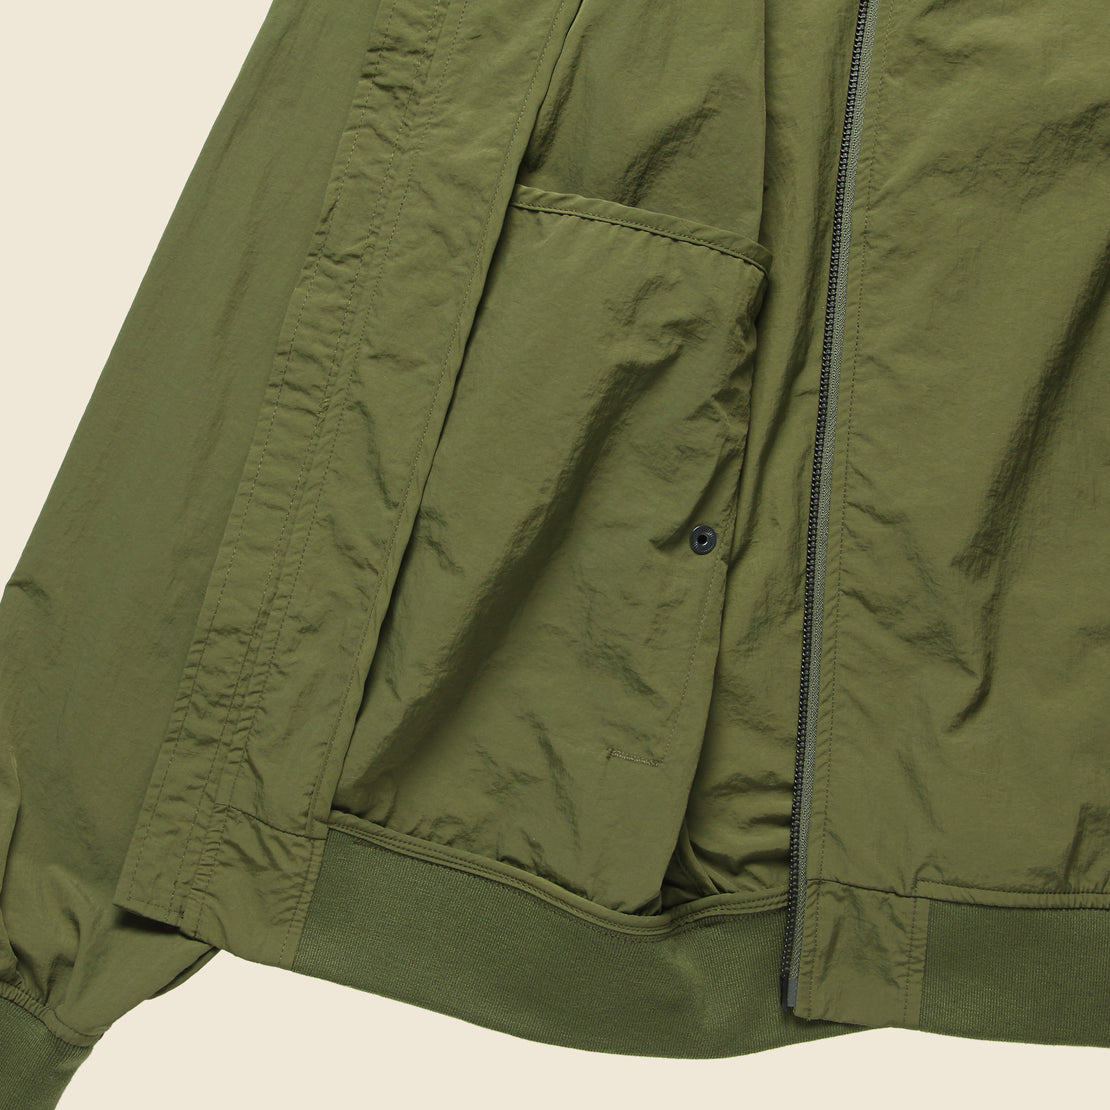 Okenfield Jacket - Olive - Penfield - STAG Provisions - Outerwear - Coat / Jacket